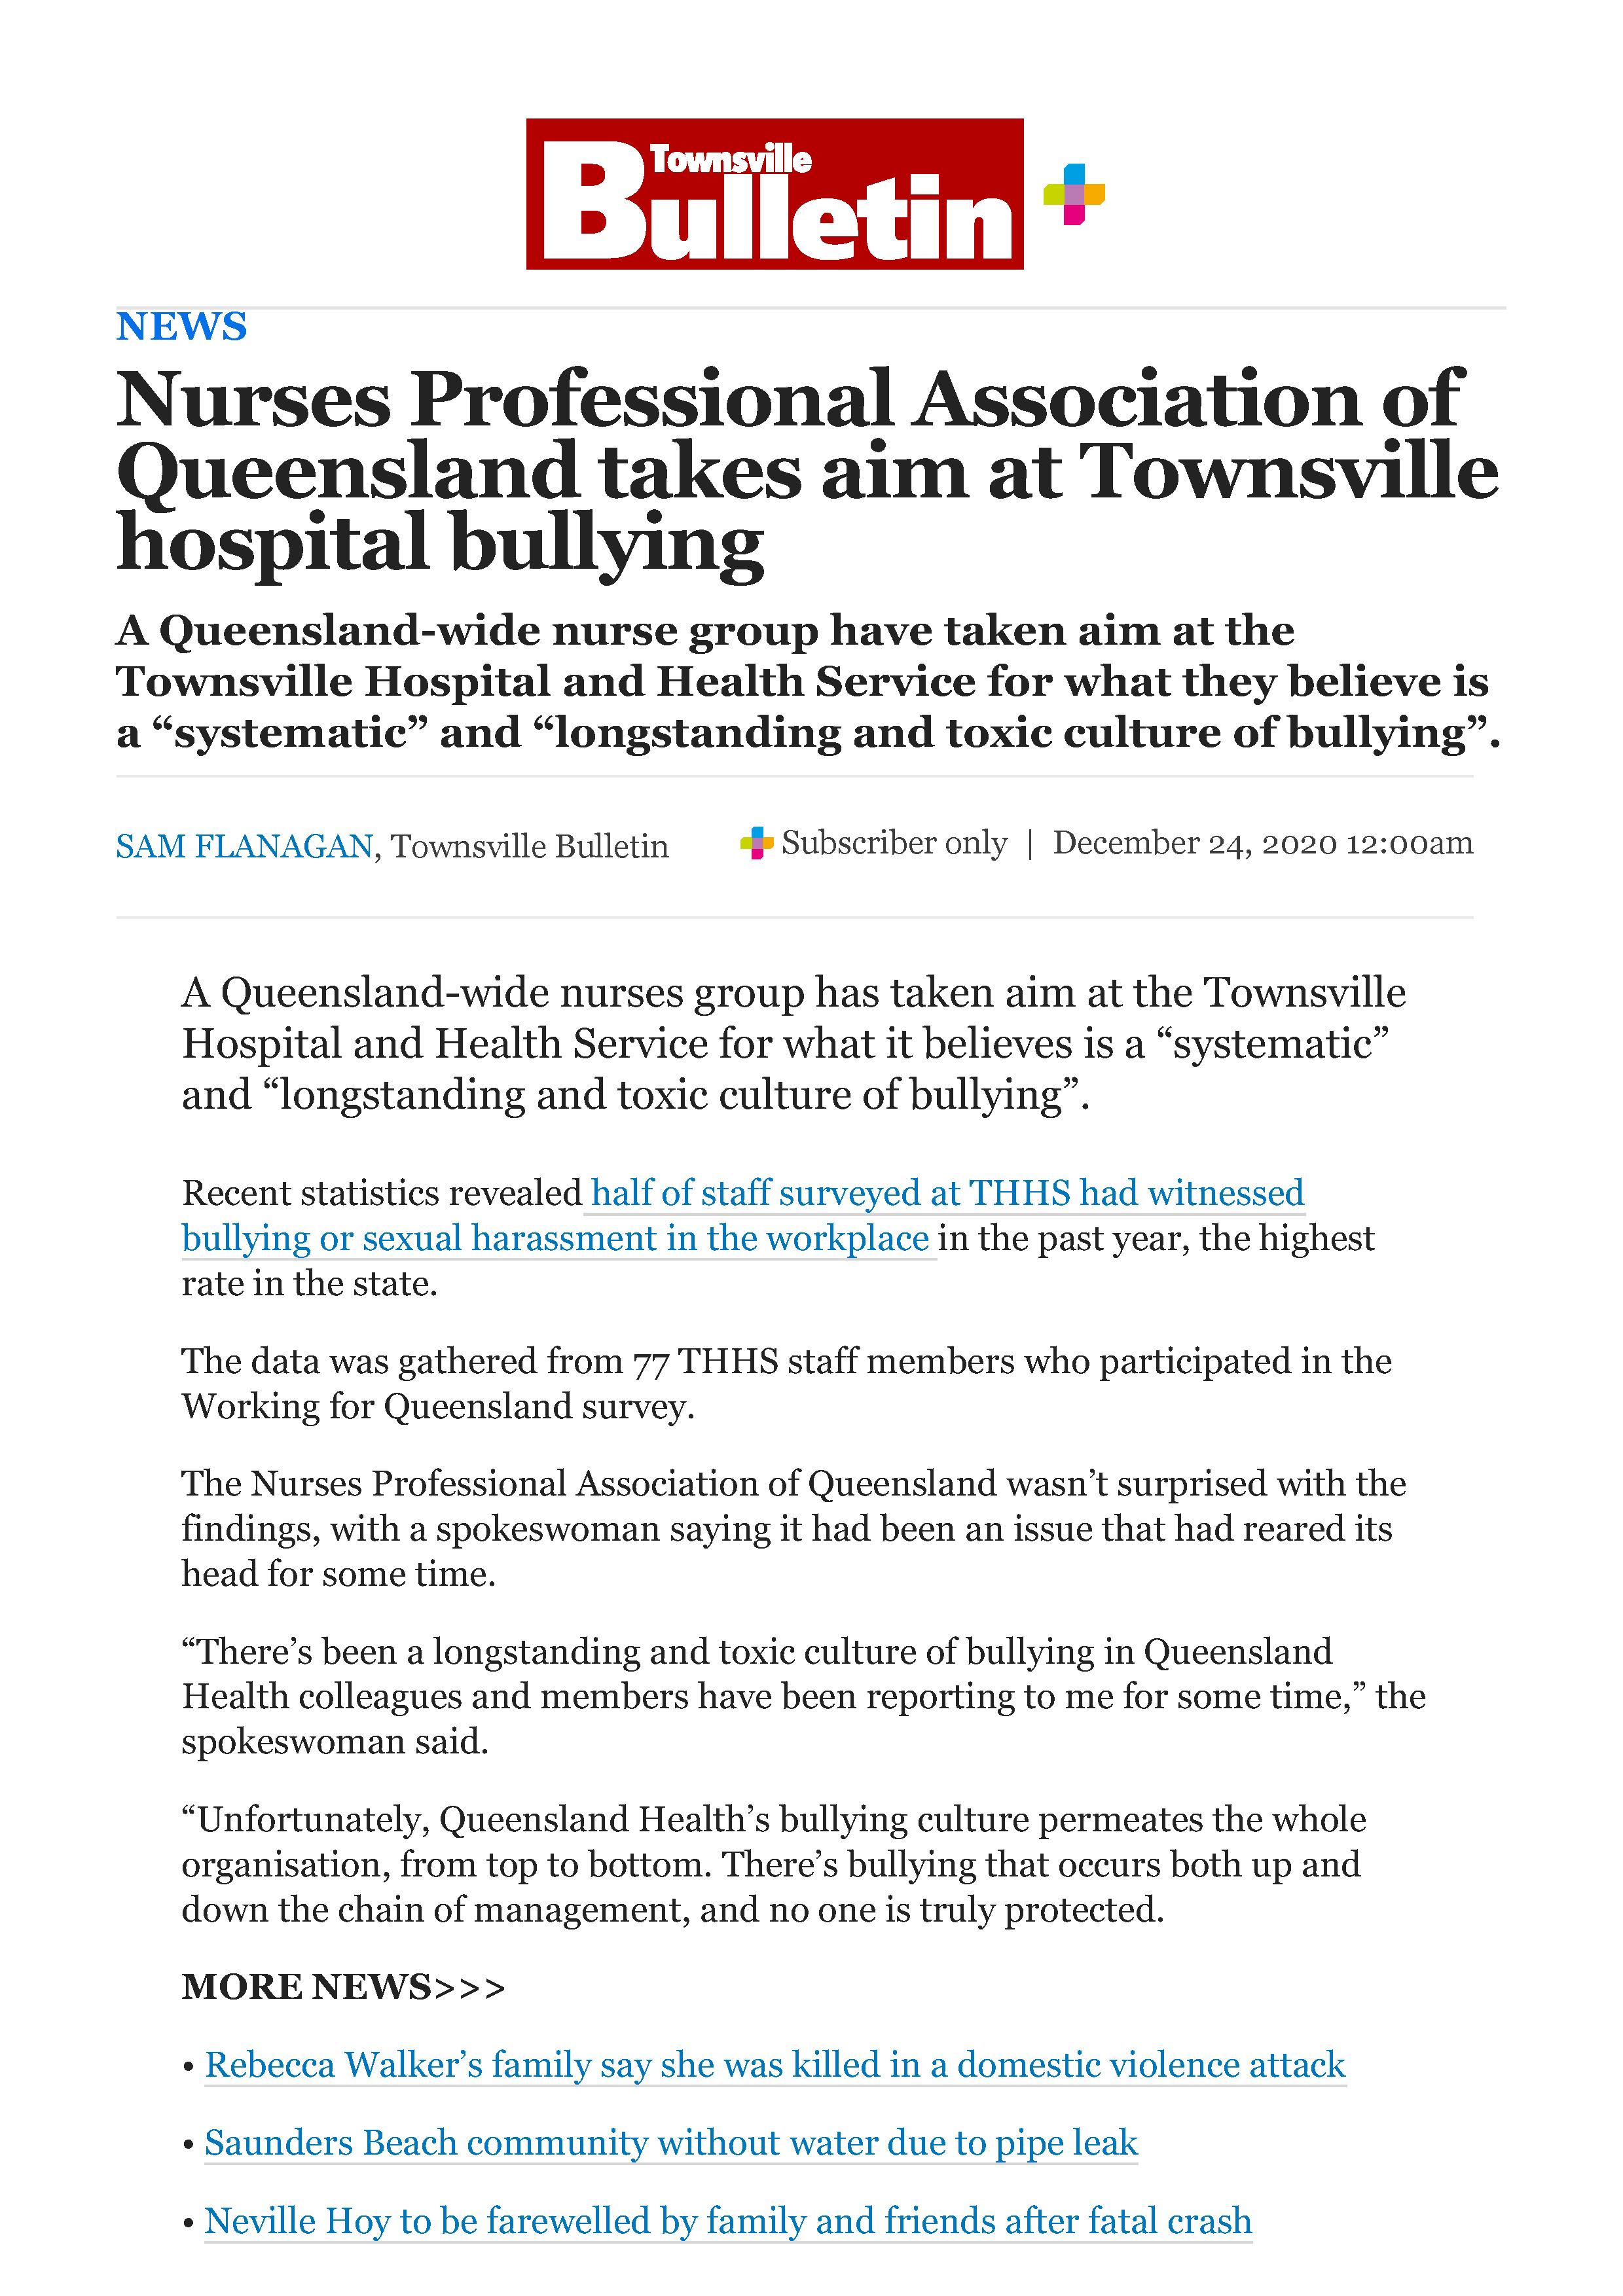 Nurses_Professional_Association_of_Queensland_takes_aim_at_Townsville_hospital_bullying___Townsville_Bulletin_Page_1